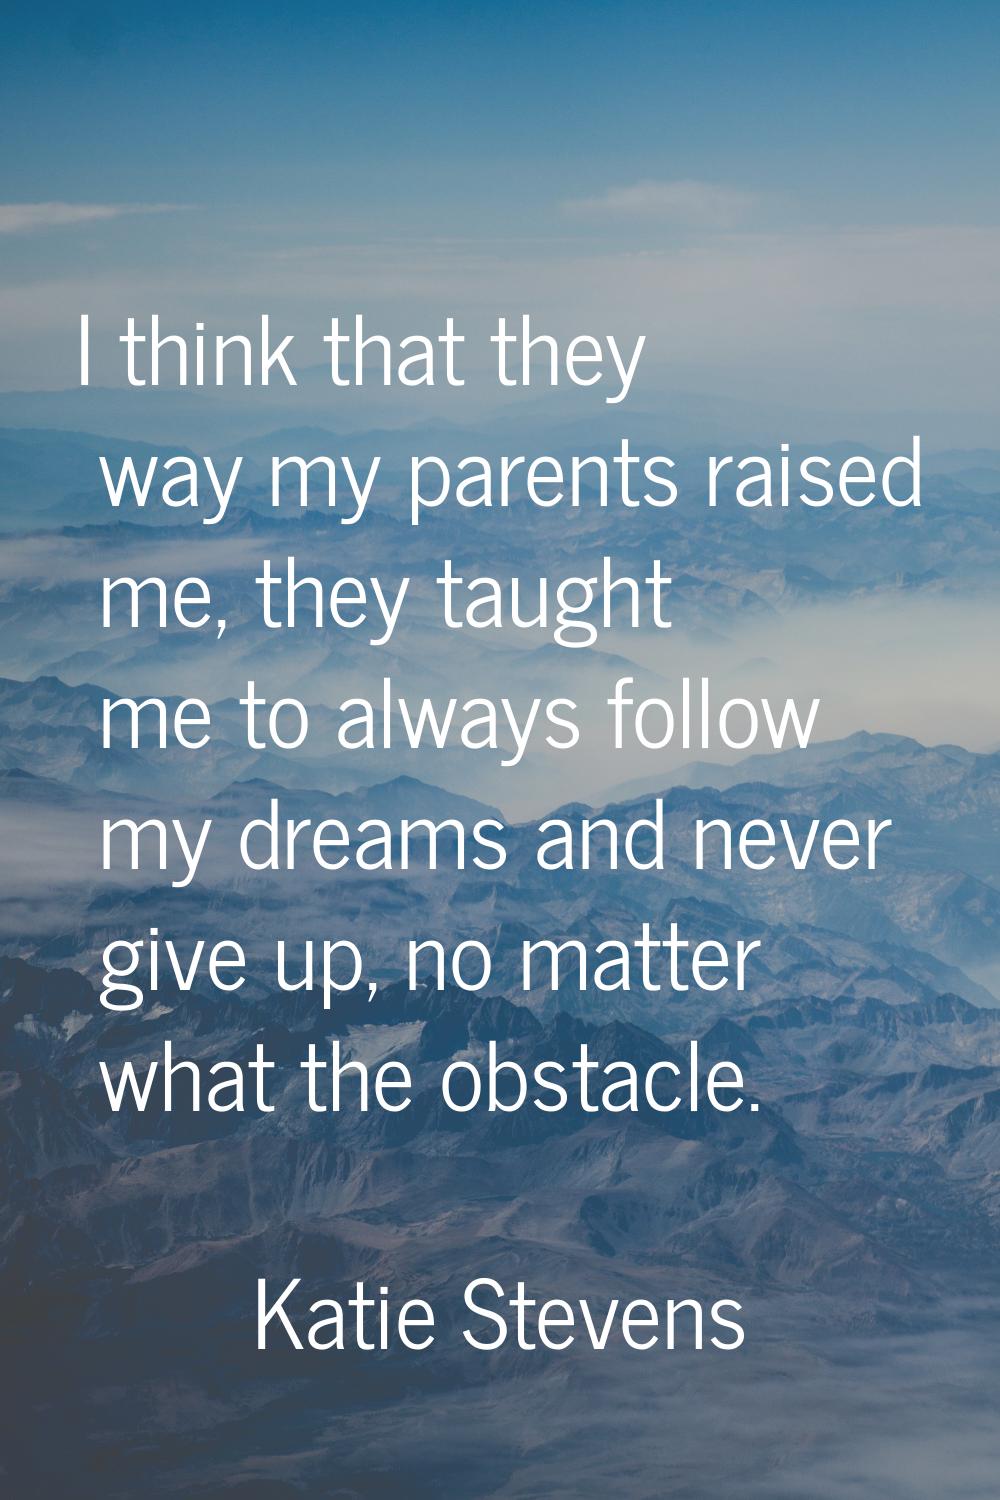 I think that they way my parents raised me, they taught me to always follow my dreams and never giv